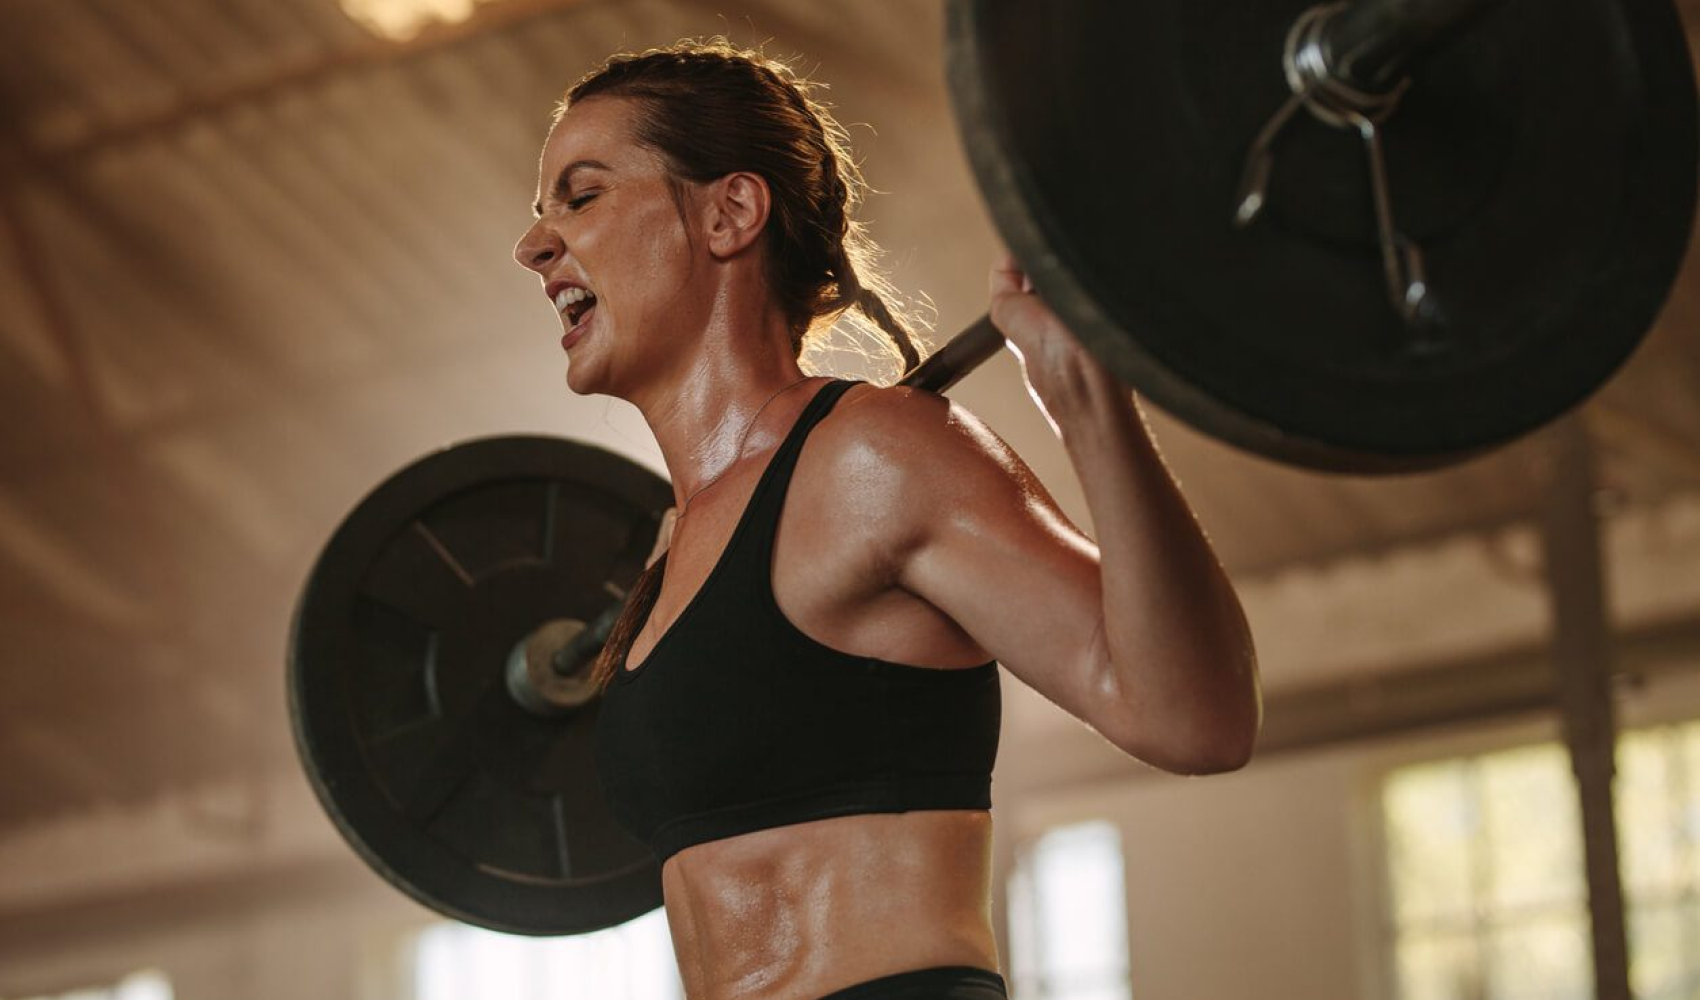 Strong woman exercising with heavy weights